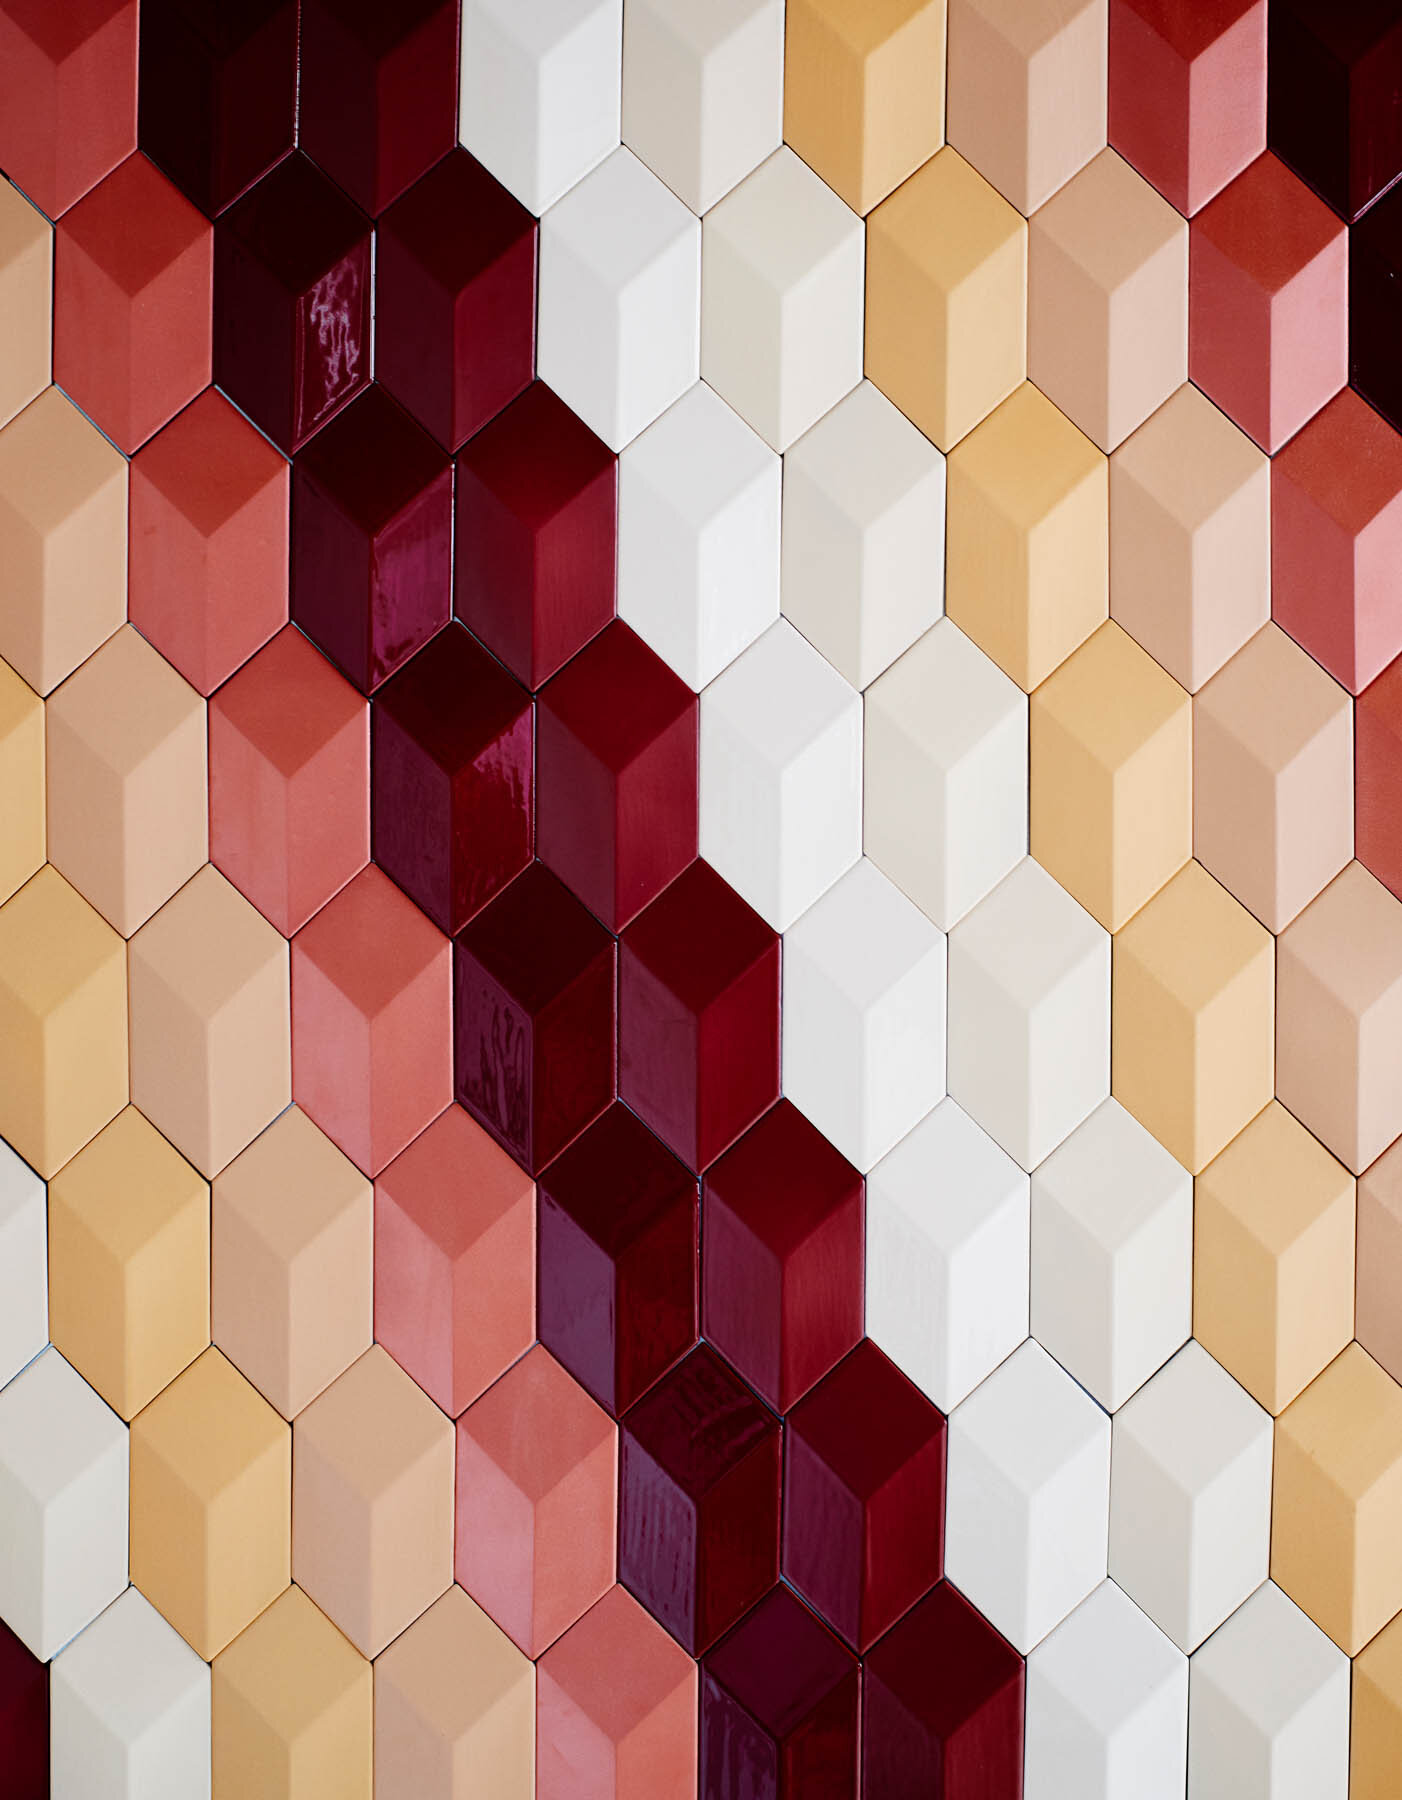 Wall with clay tiles in format rombo 3D glazed with 'Bordeaux Shiny Crystal' and 'Red Sea Matt'